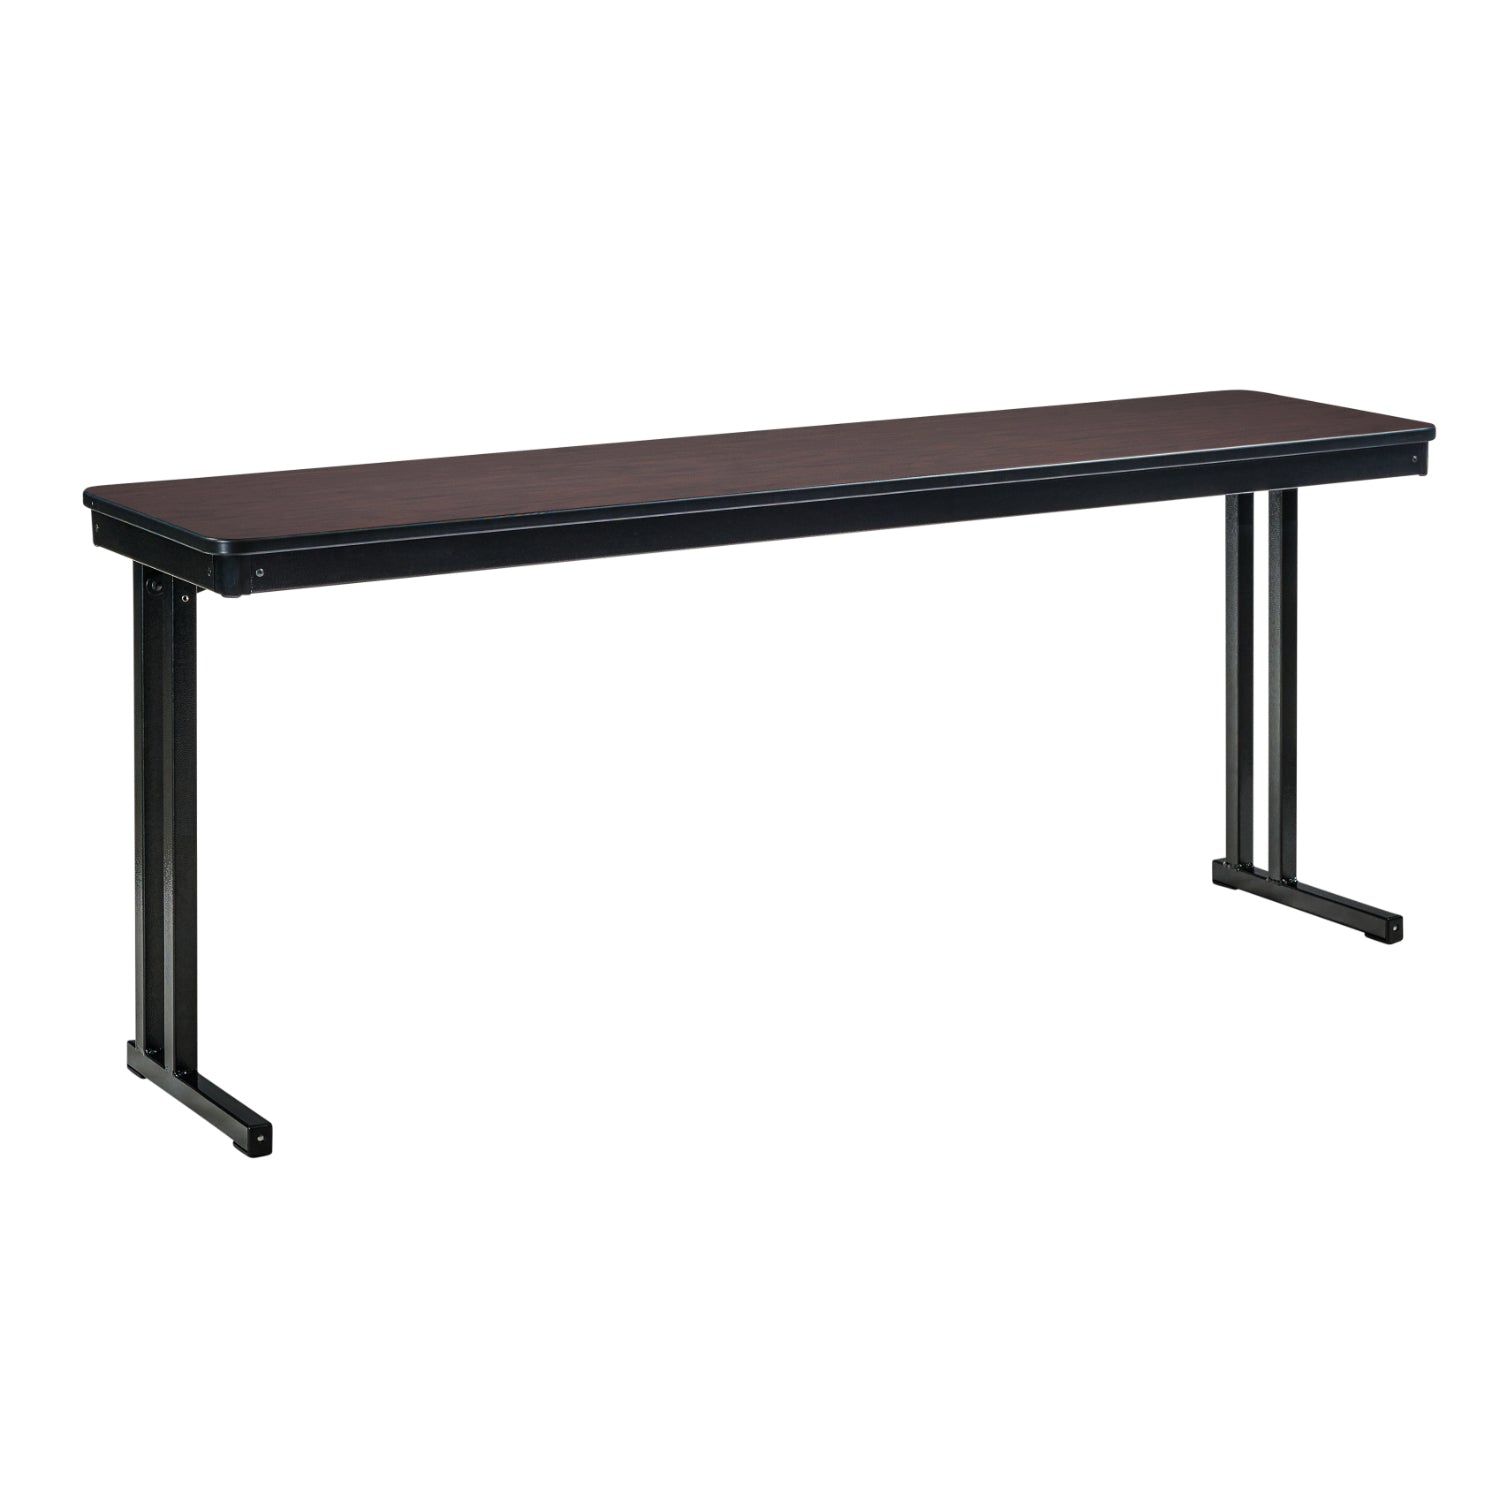 Max Seating Folding Training and Seminar Table with Cantilever Legs, 18" x 84", High Pressure Laminate Top with Particleboard Core/PVC Edge Banding